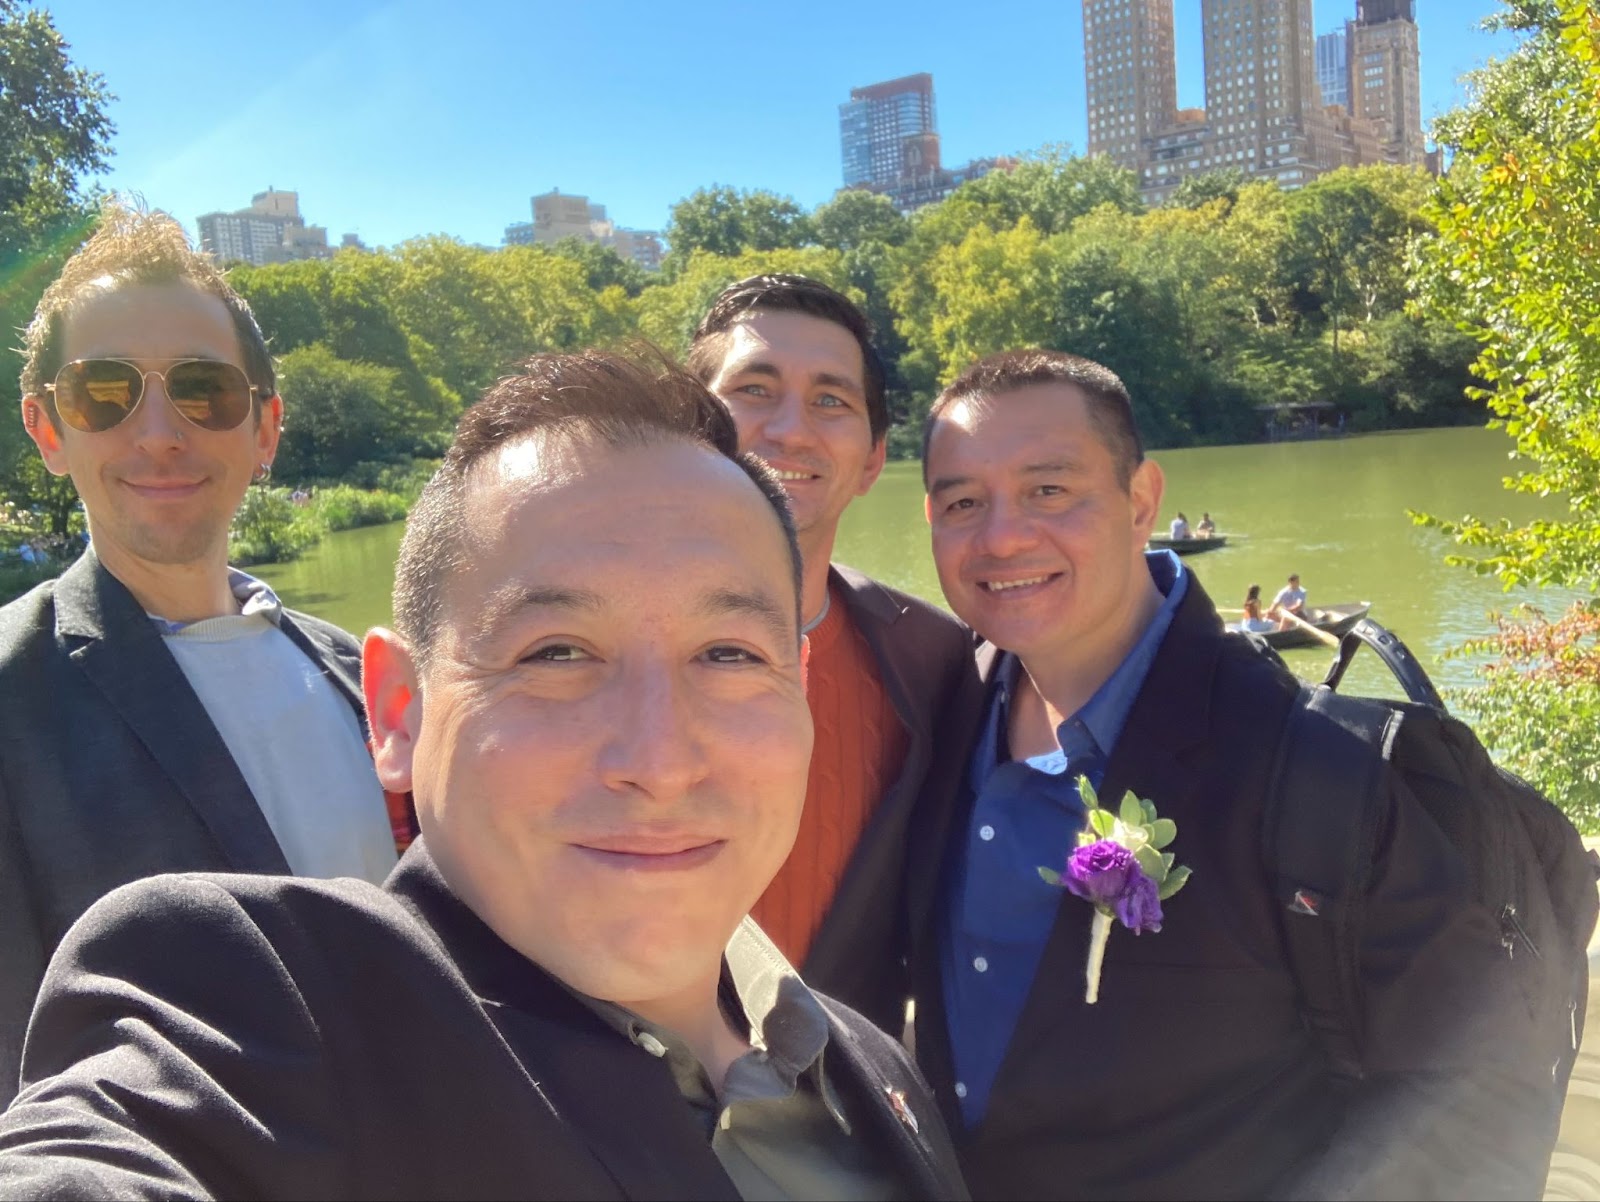 A group of smiling men stand by a lake in Central Park